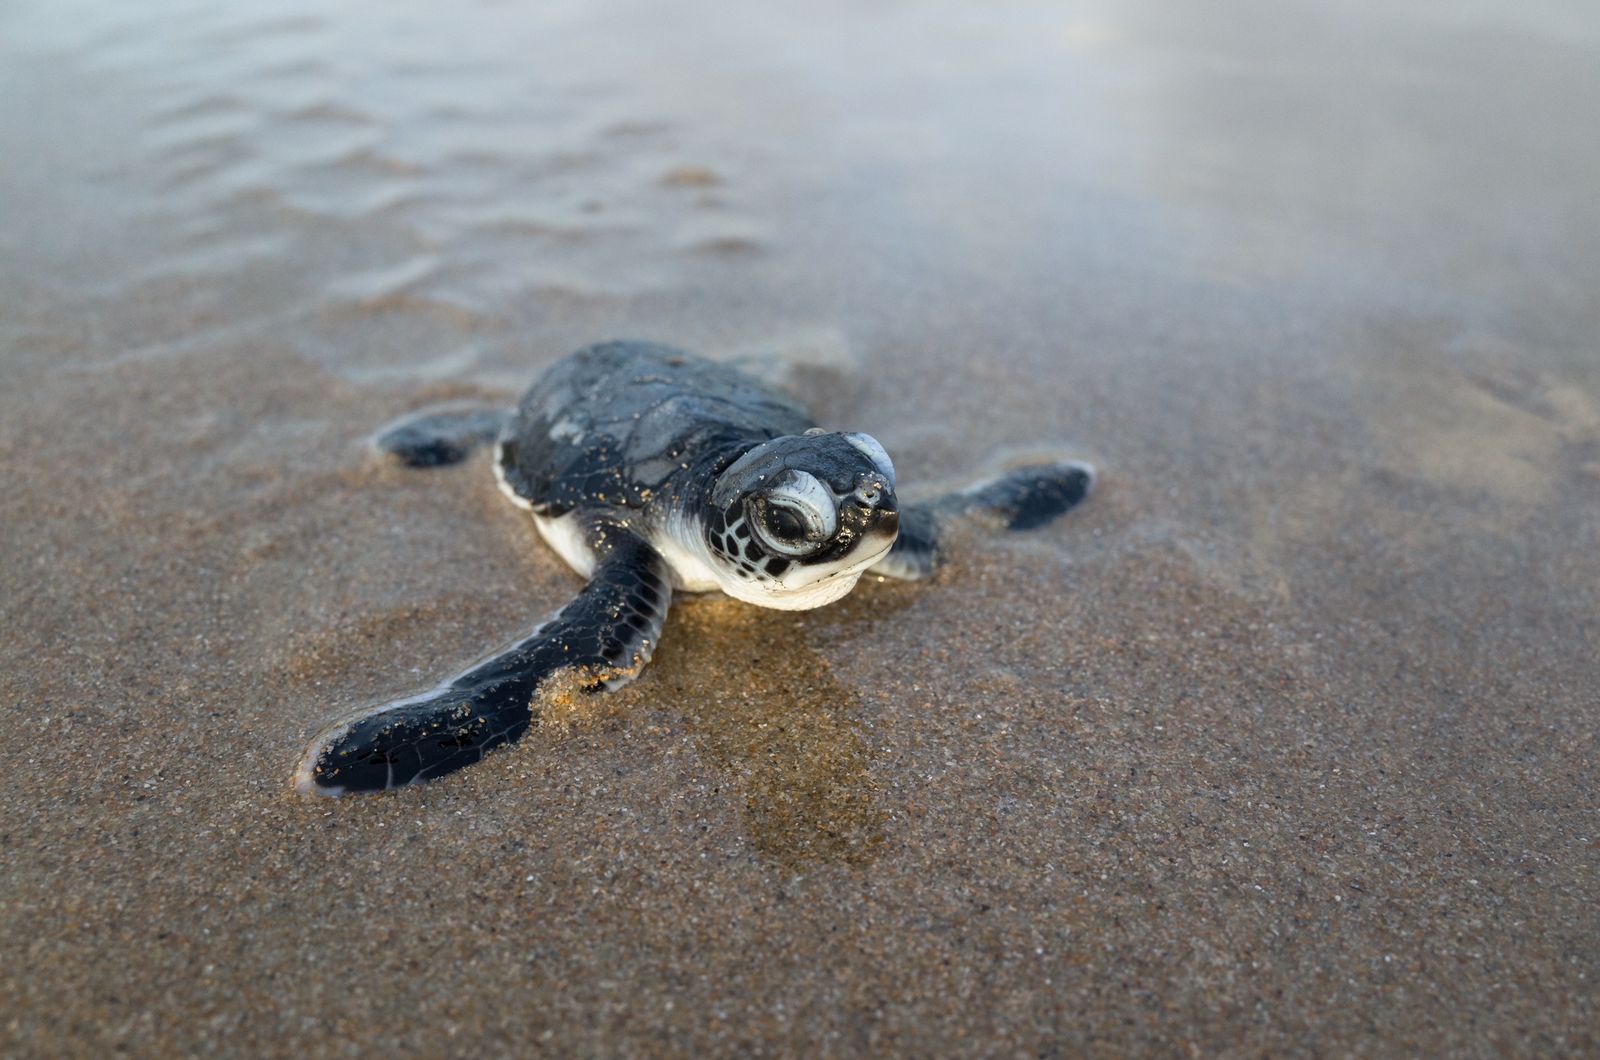 Tiny turtles can bring huge problems, News